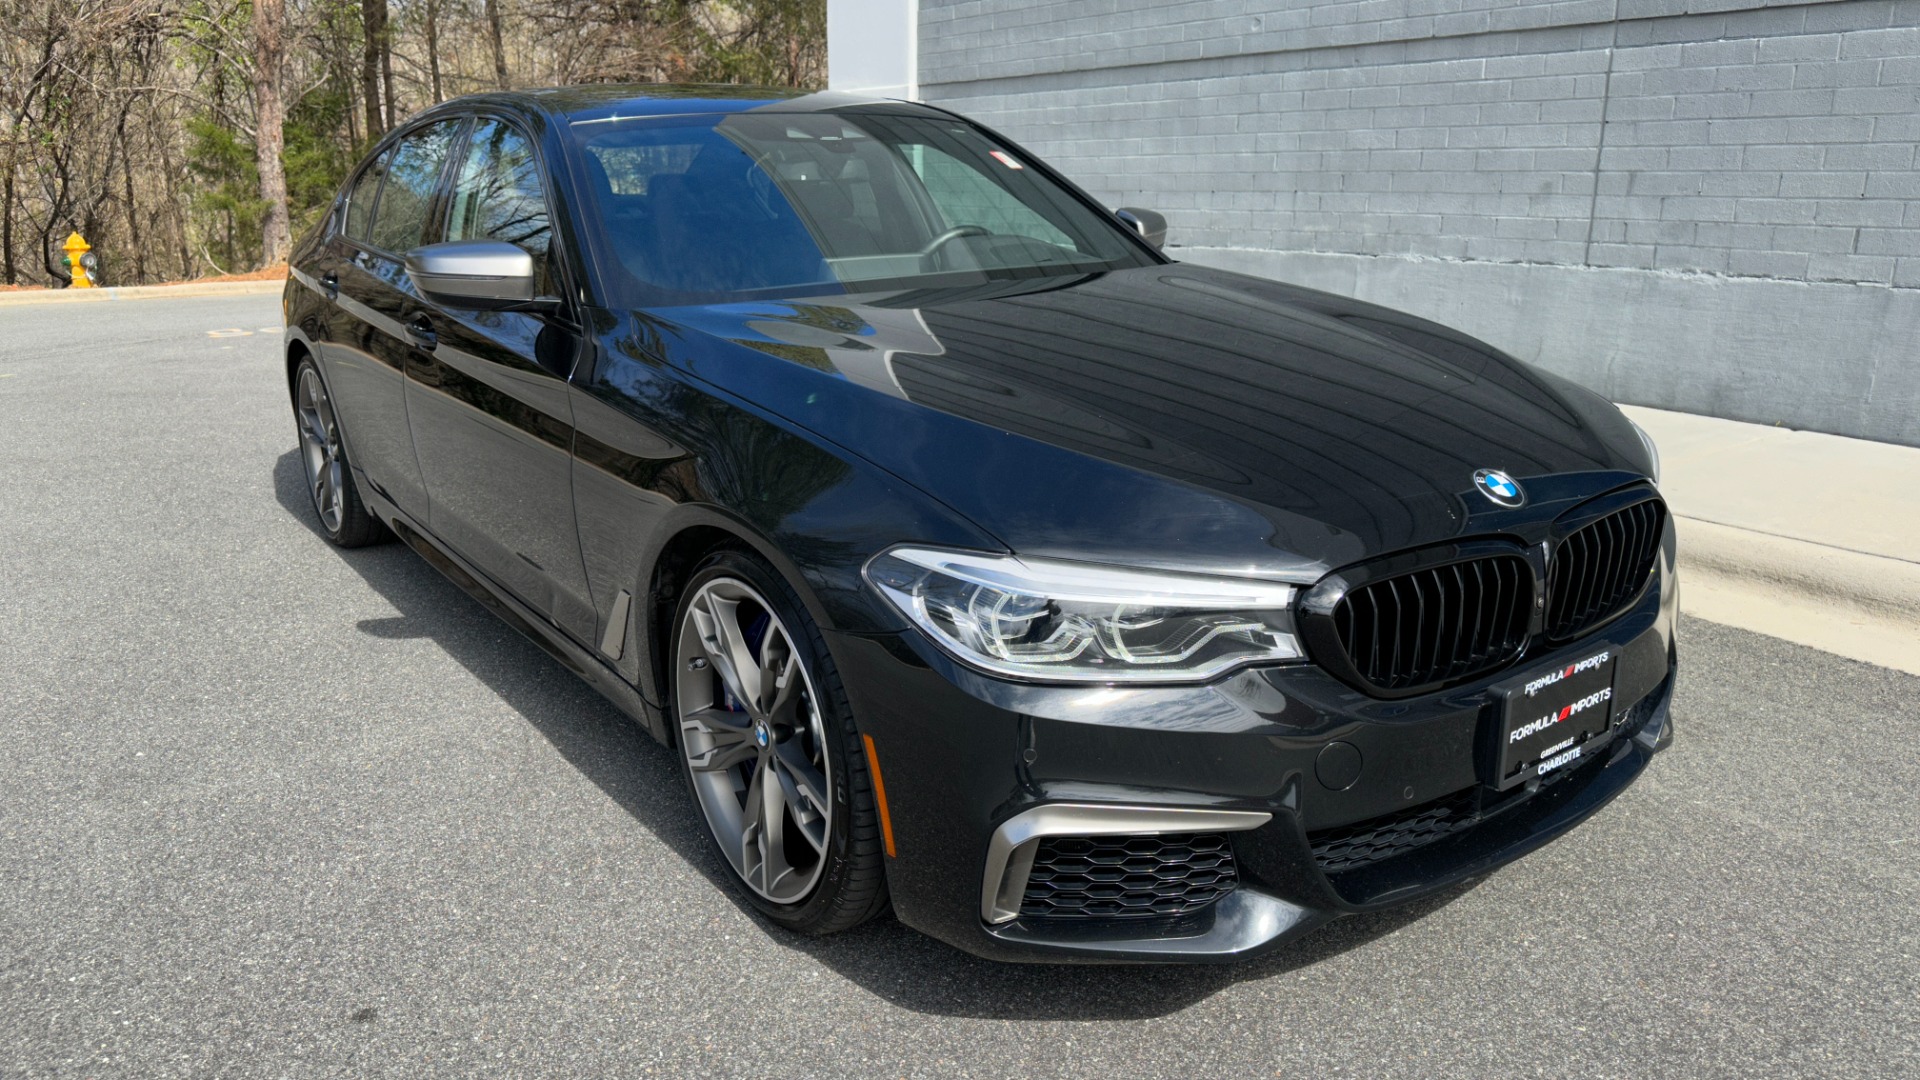 Used 2020 BMW 5 Series M550i xDrive / 20IN WHEELS/ DRIVE ASSIST PLUS / EXECUTIVE PACKAGE / HEATED  for sale Sold at Formula Imports in Charlotte NC 28227 5